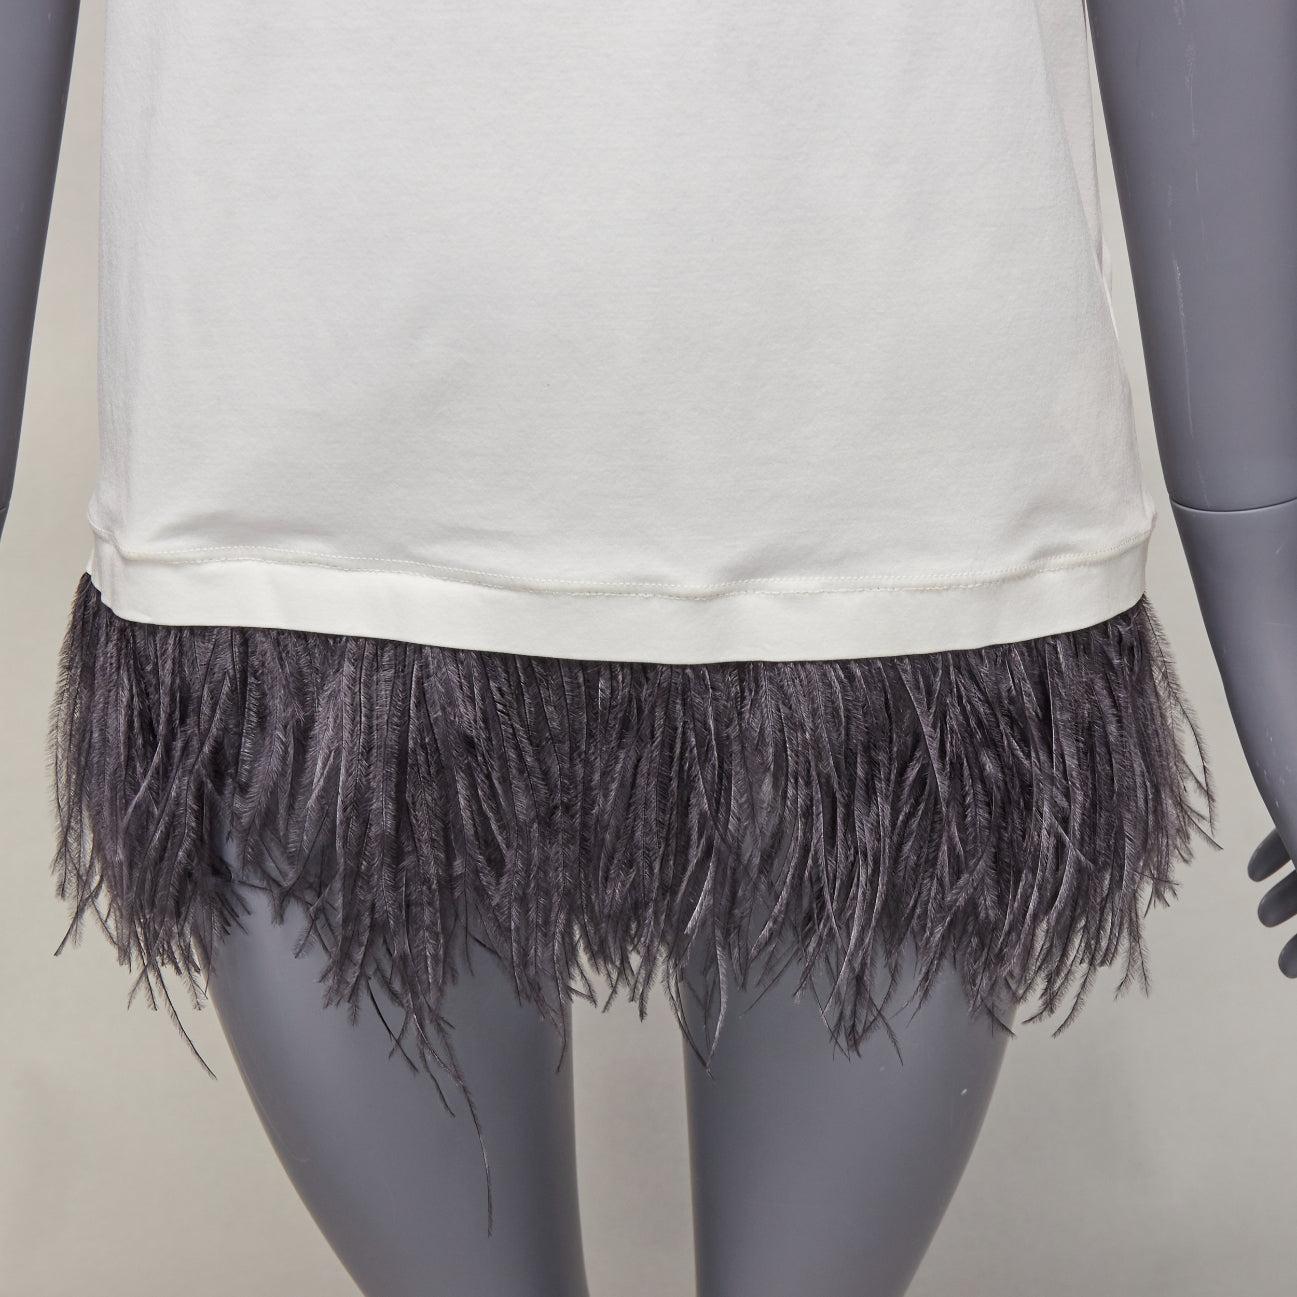 JIL SANDER white cotton black ostrich feather trim crew neck tshirt S
Reference: LNKO/A02343
Brand: Jil Sander
Material: Cotton, Feather
Color: White, Black
Pattern: Solid
Closure: Pullover
Made in: Italy

CONDITION:
Condition: Very good, this item